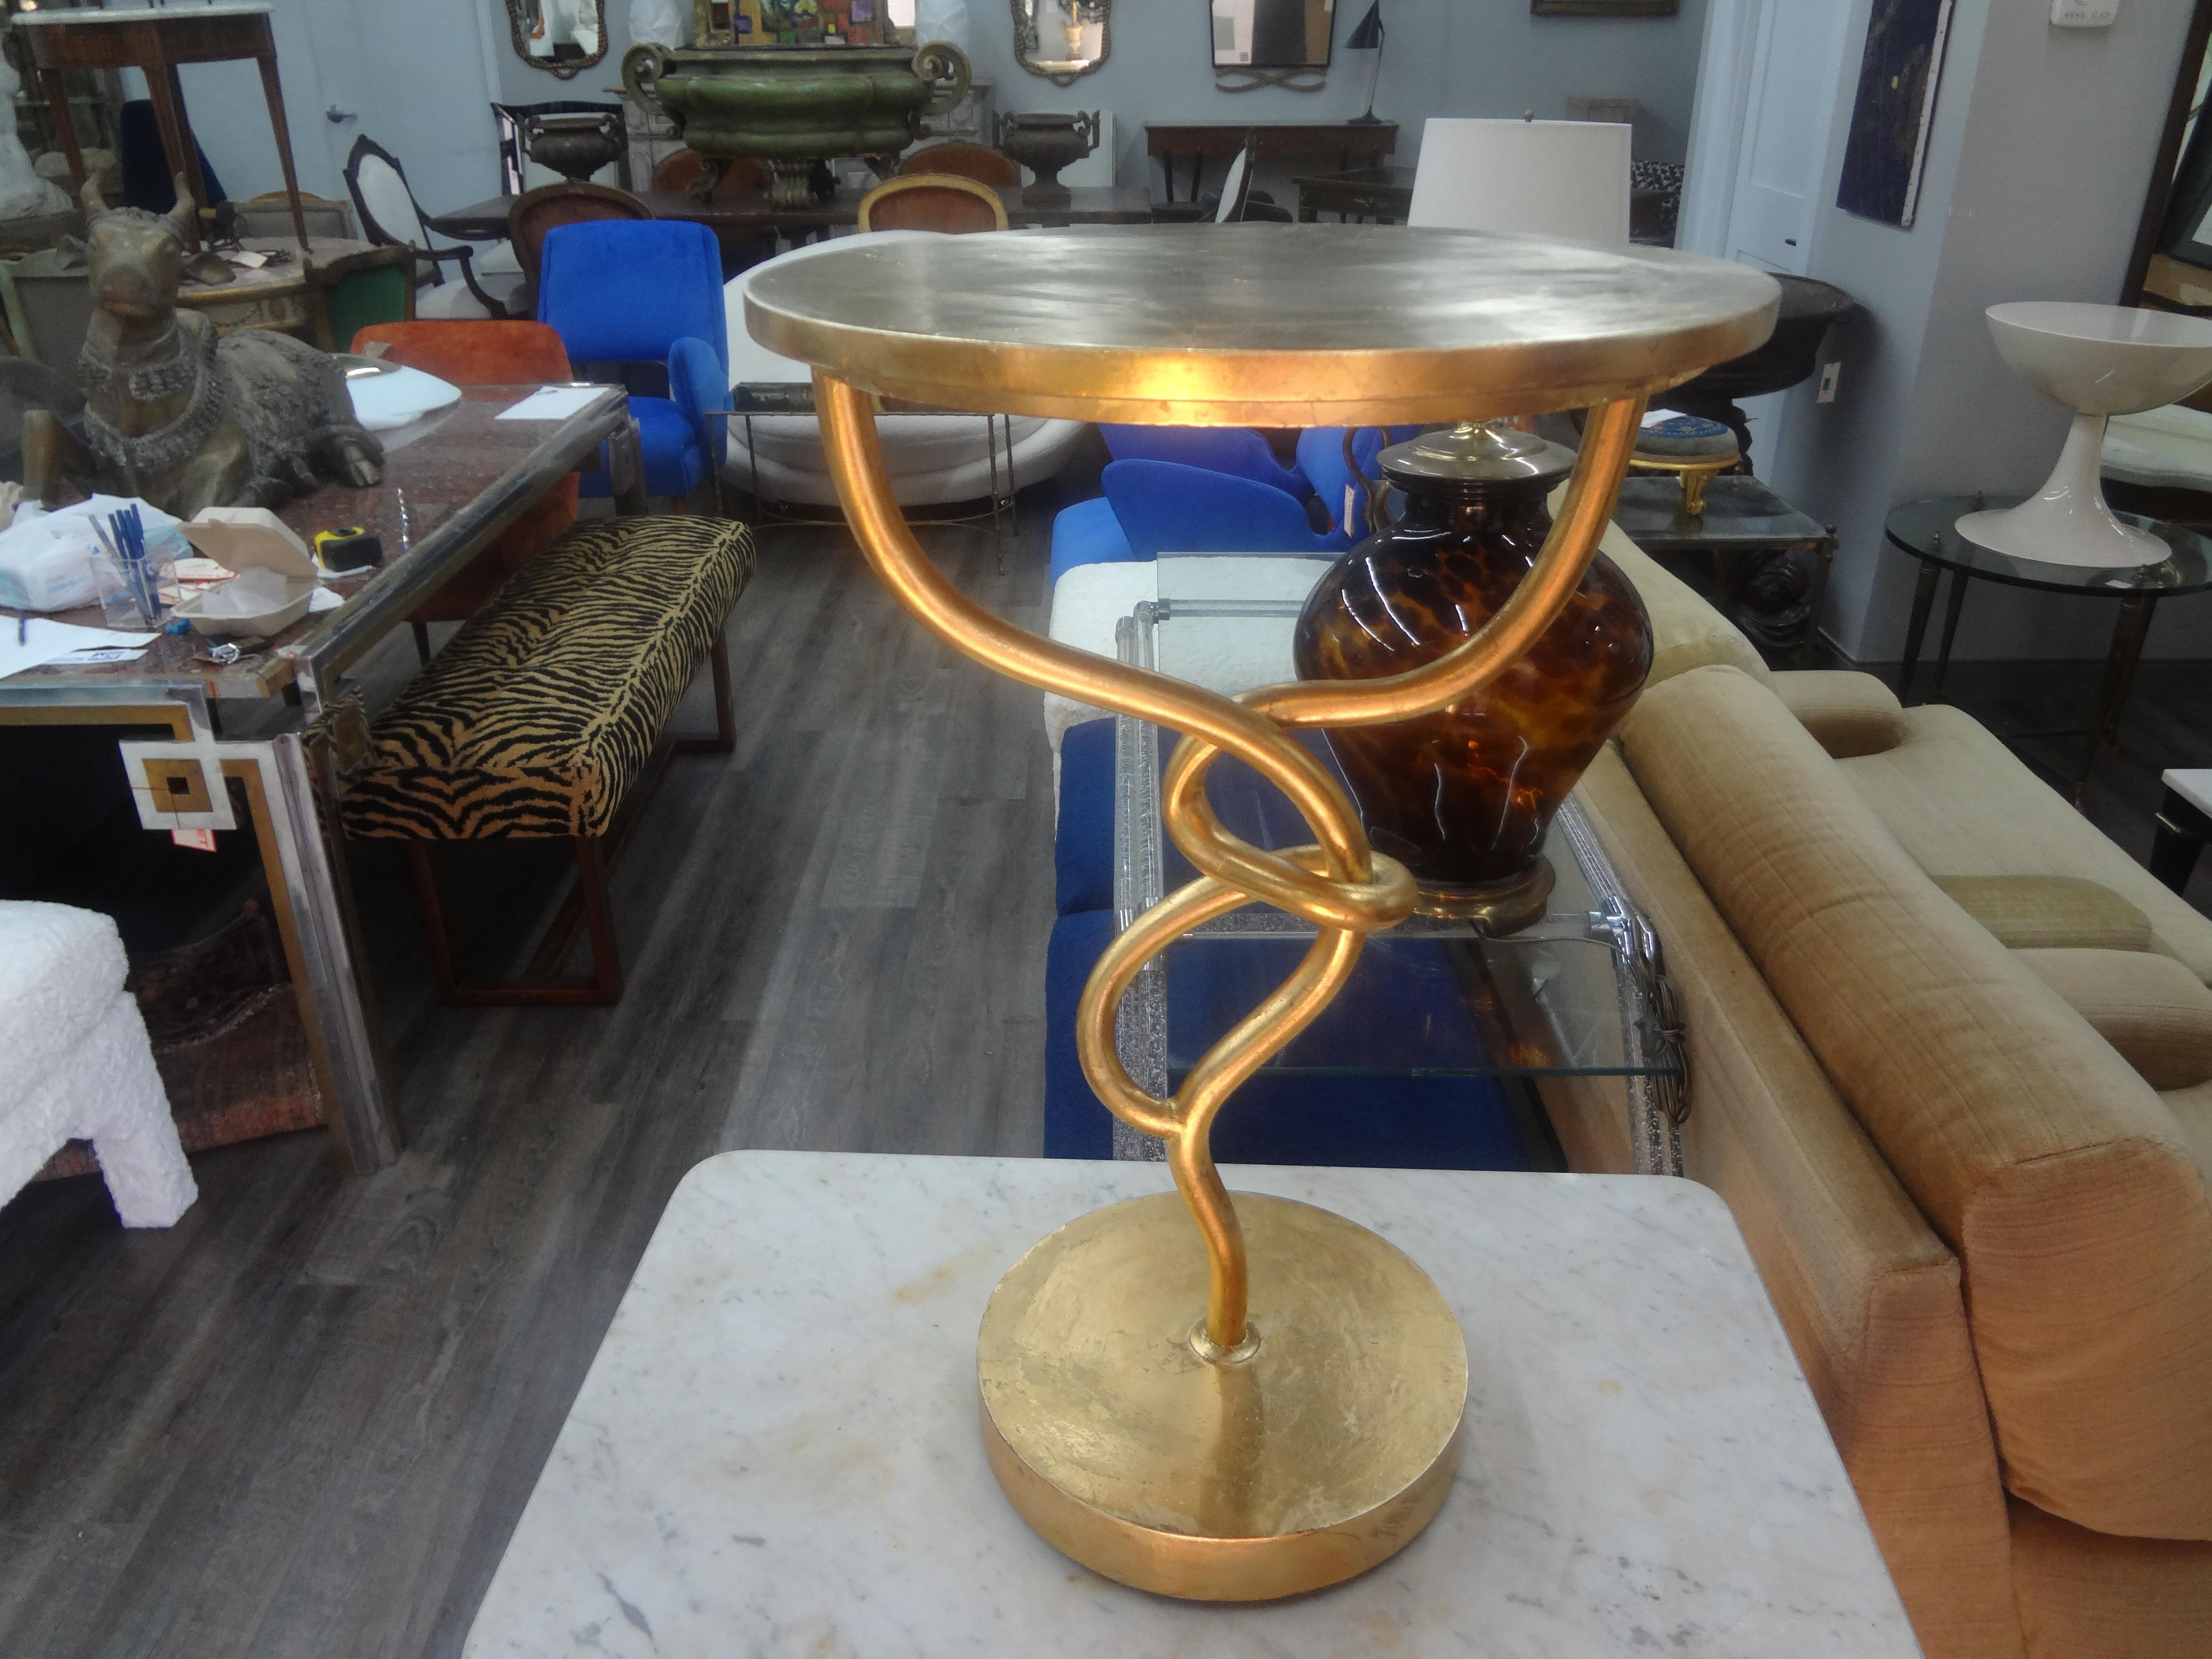 20th Century Gilt Iron Knot Table. Our stunning post modern Roche Bobois style gilt knot table, possibly French has a great sculptural look and is the perfect side table, lamp table or pedestal for a bust or sculpture.